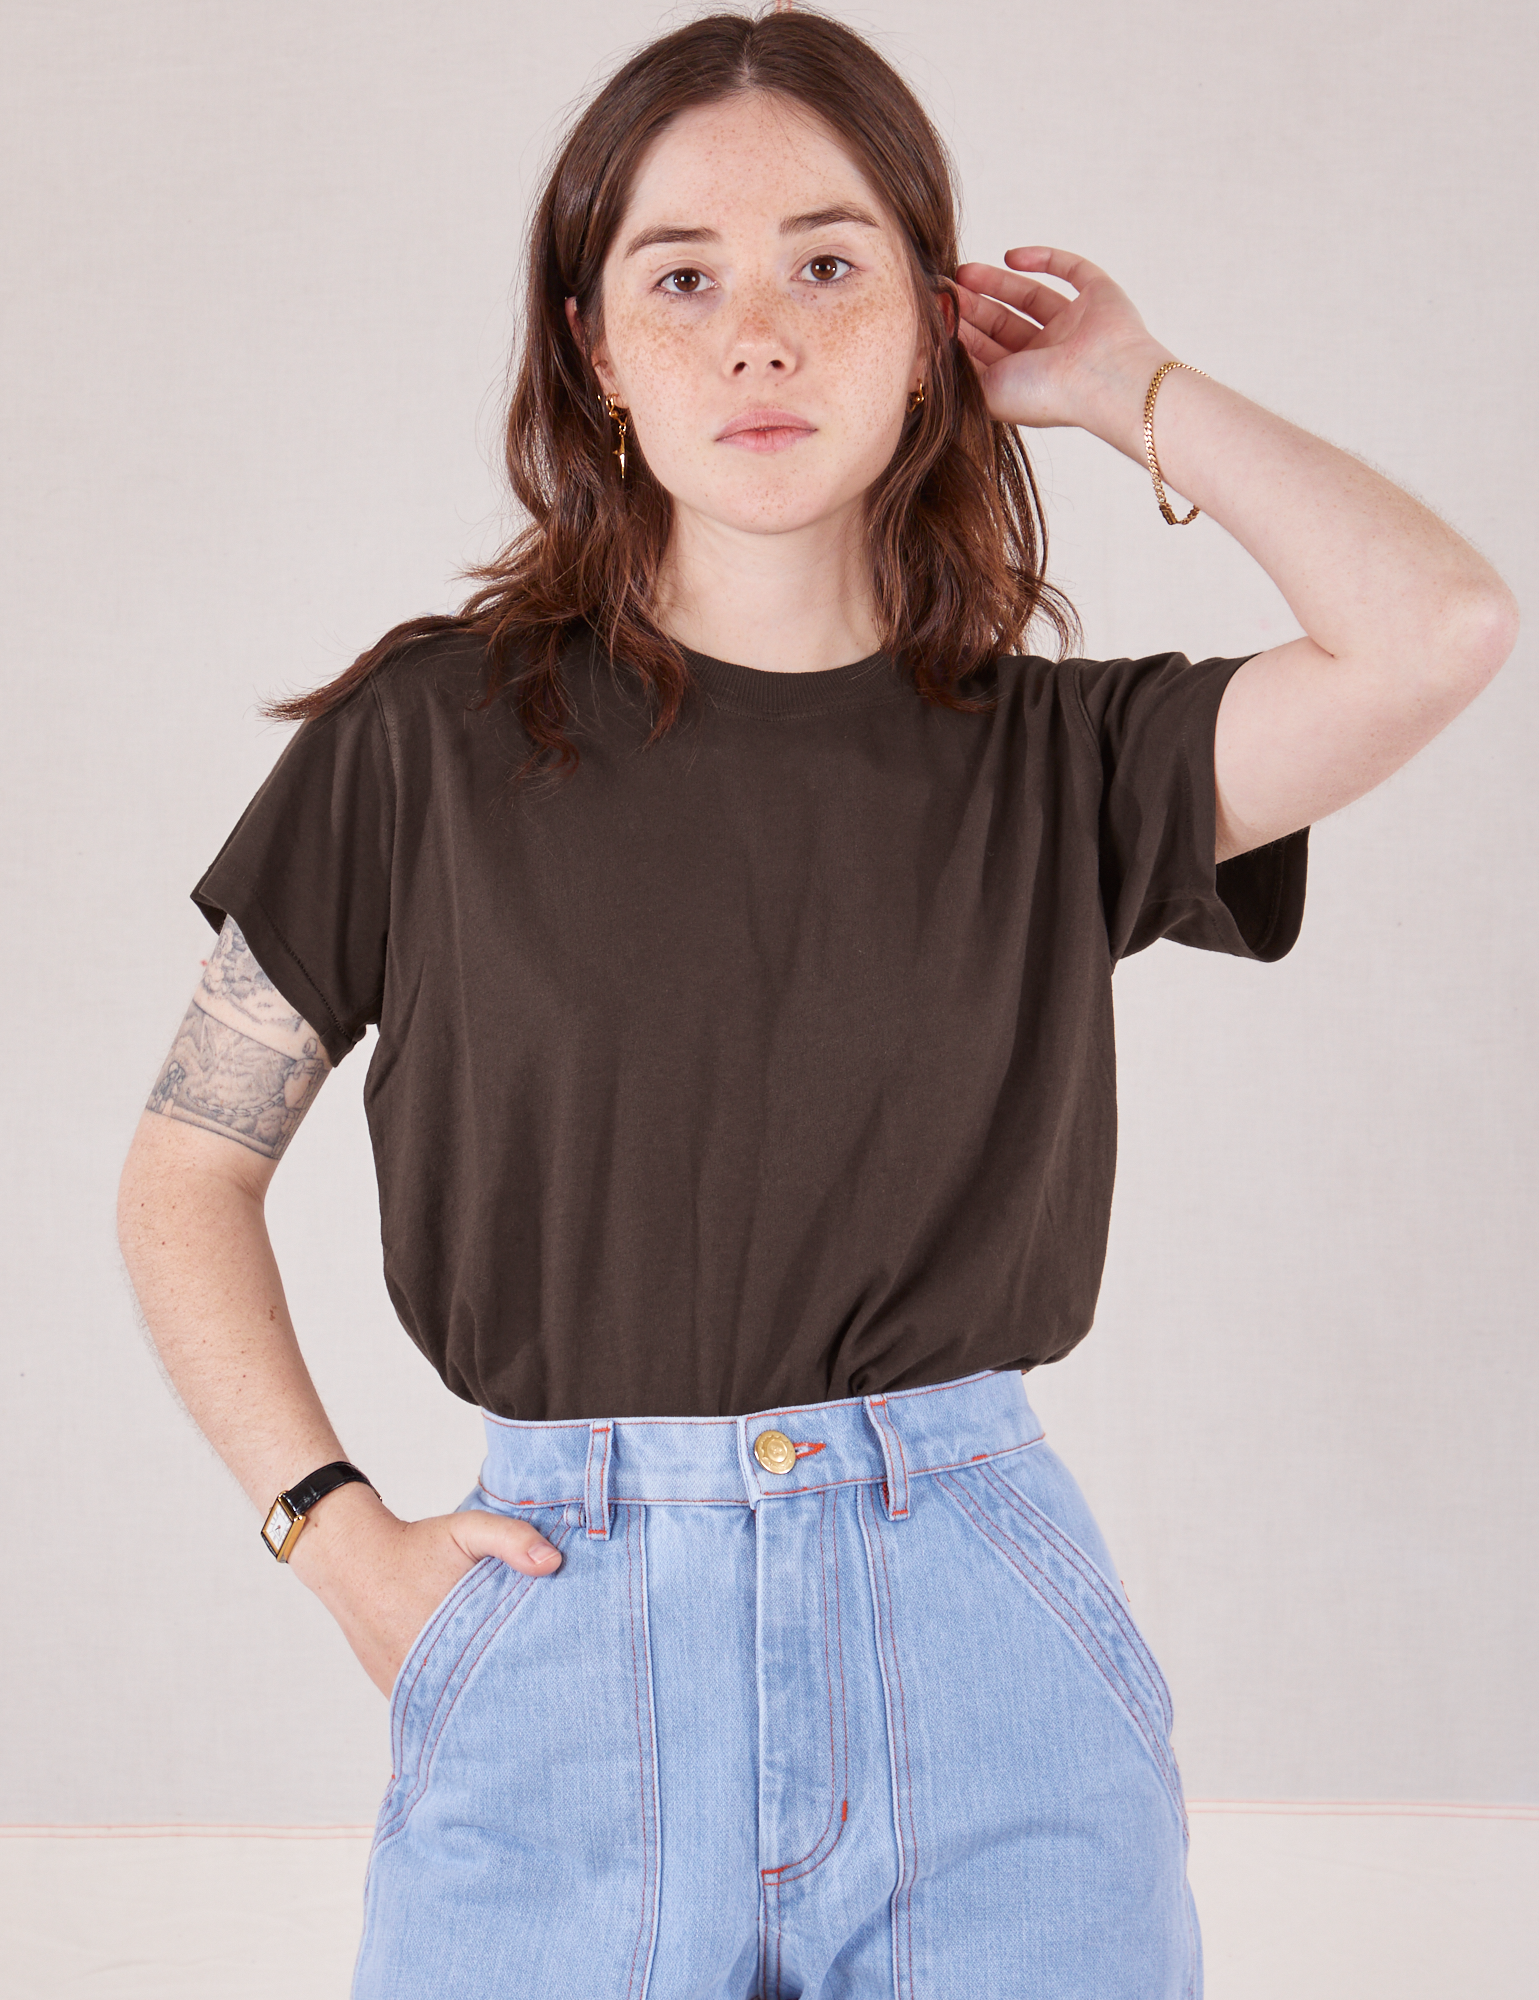 Hana is wearing Organic Vintage Tee in Espresso Brown tucked into light wash Carpenter Jeans